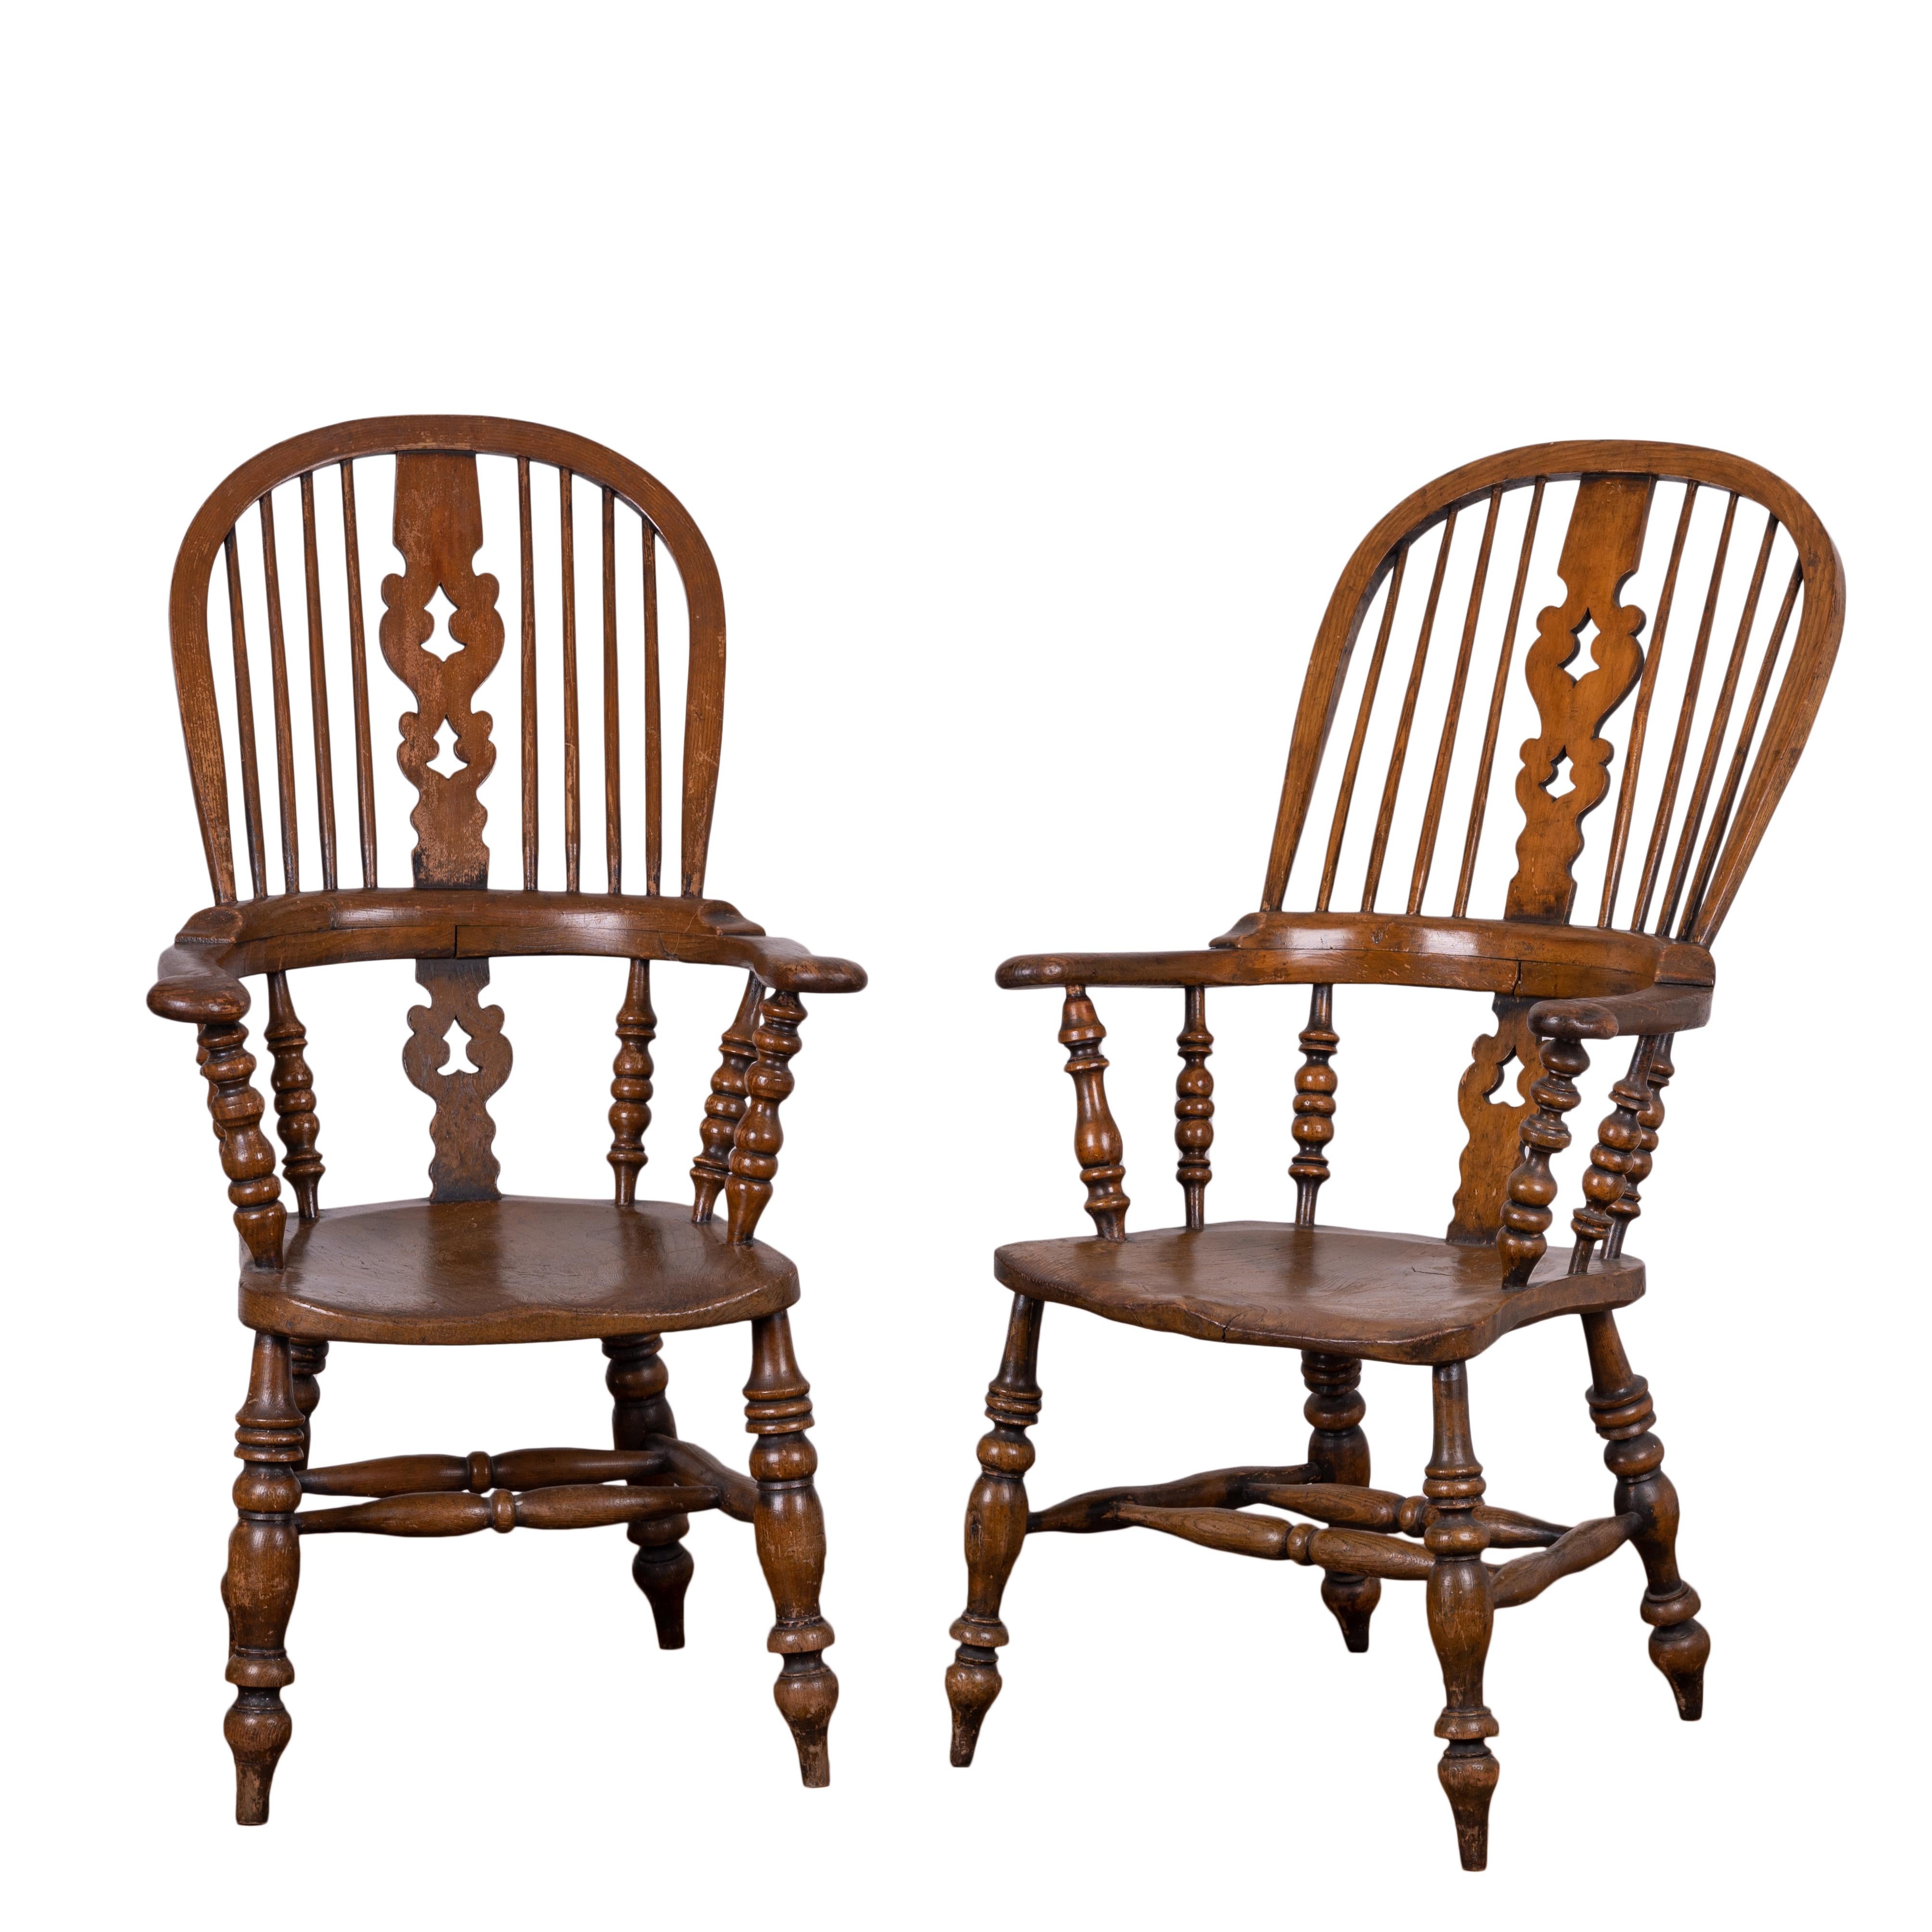 English Elm Broad Arm Windsor Armchairs, 19th Century - Set of 4 For Sale 6